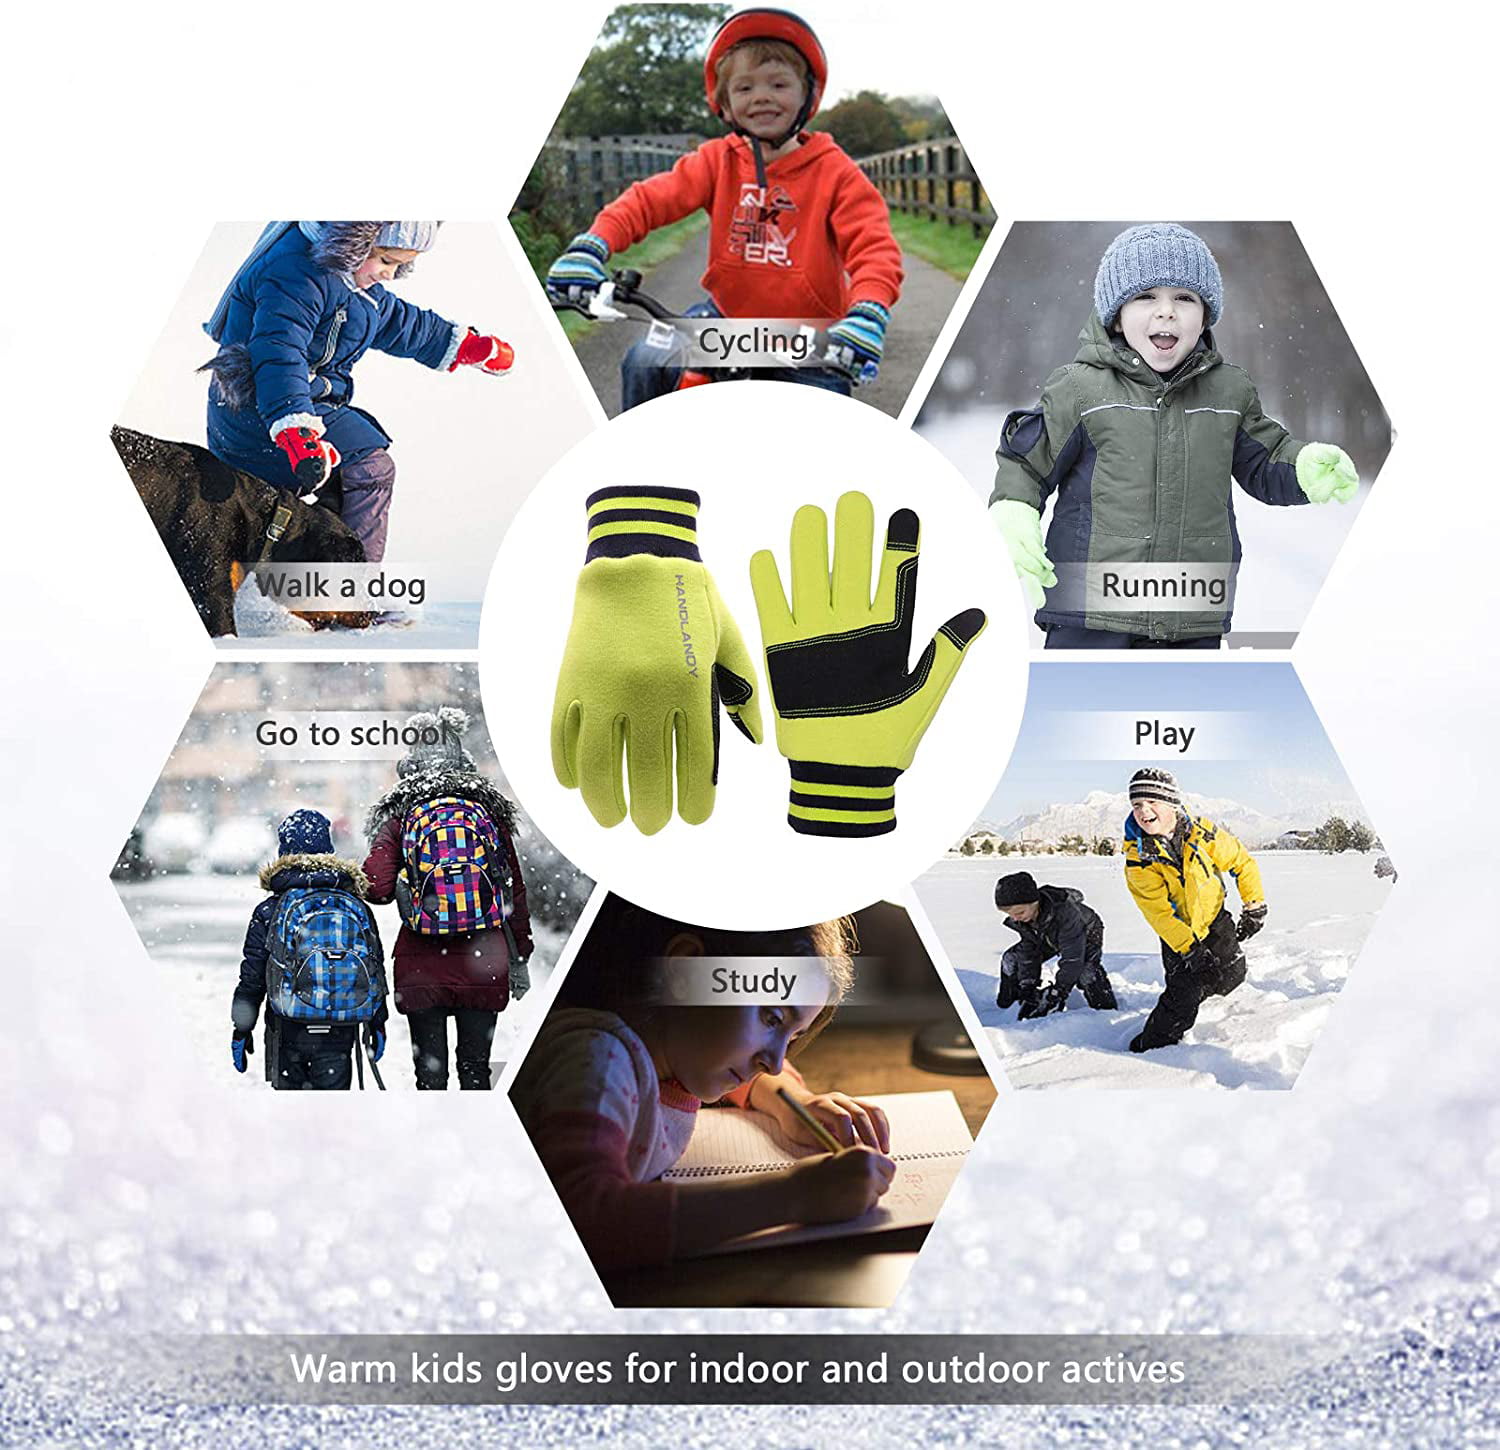 HANDLANDY Kids Gloves Winter Touchscreen Cycling Outdoors Sports Gloves for Boys Girls Toddler 2-13 Years 